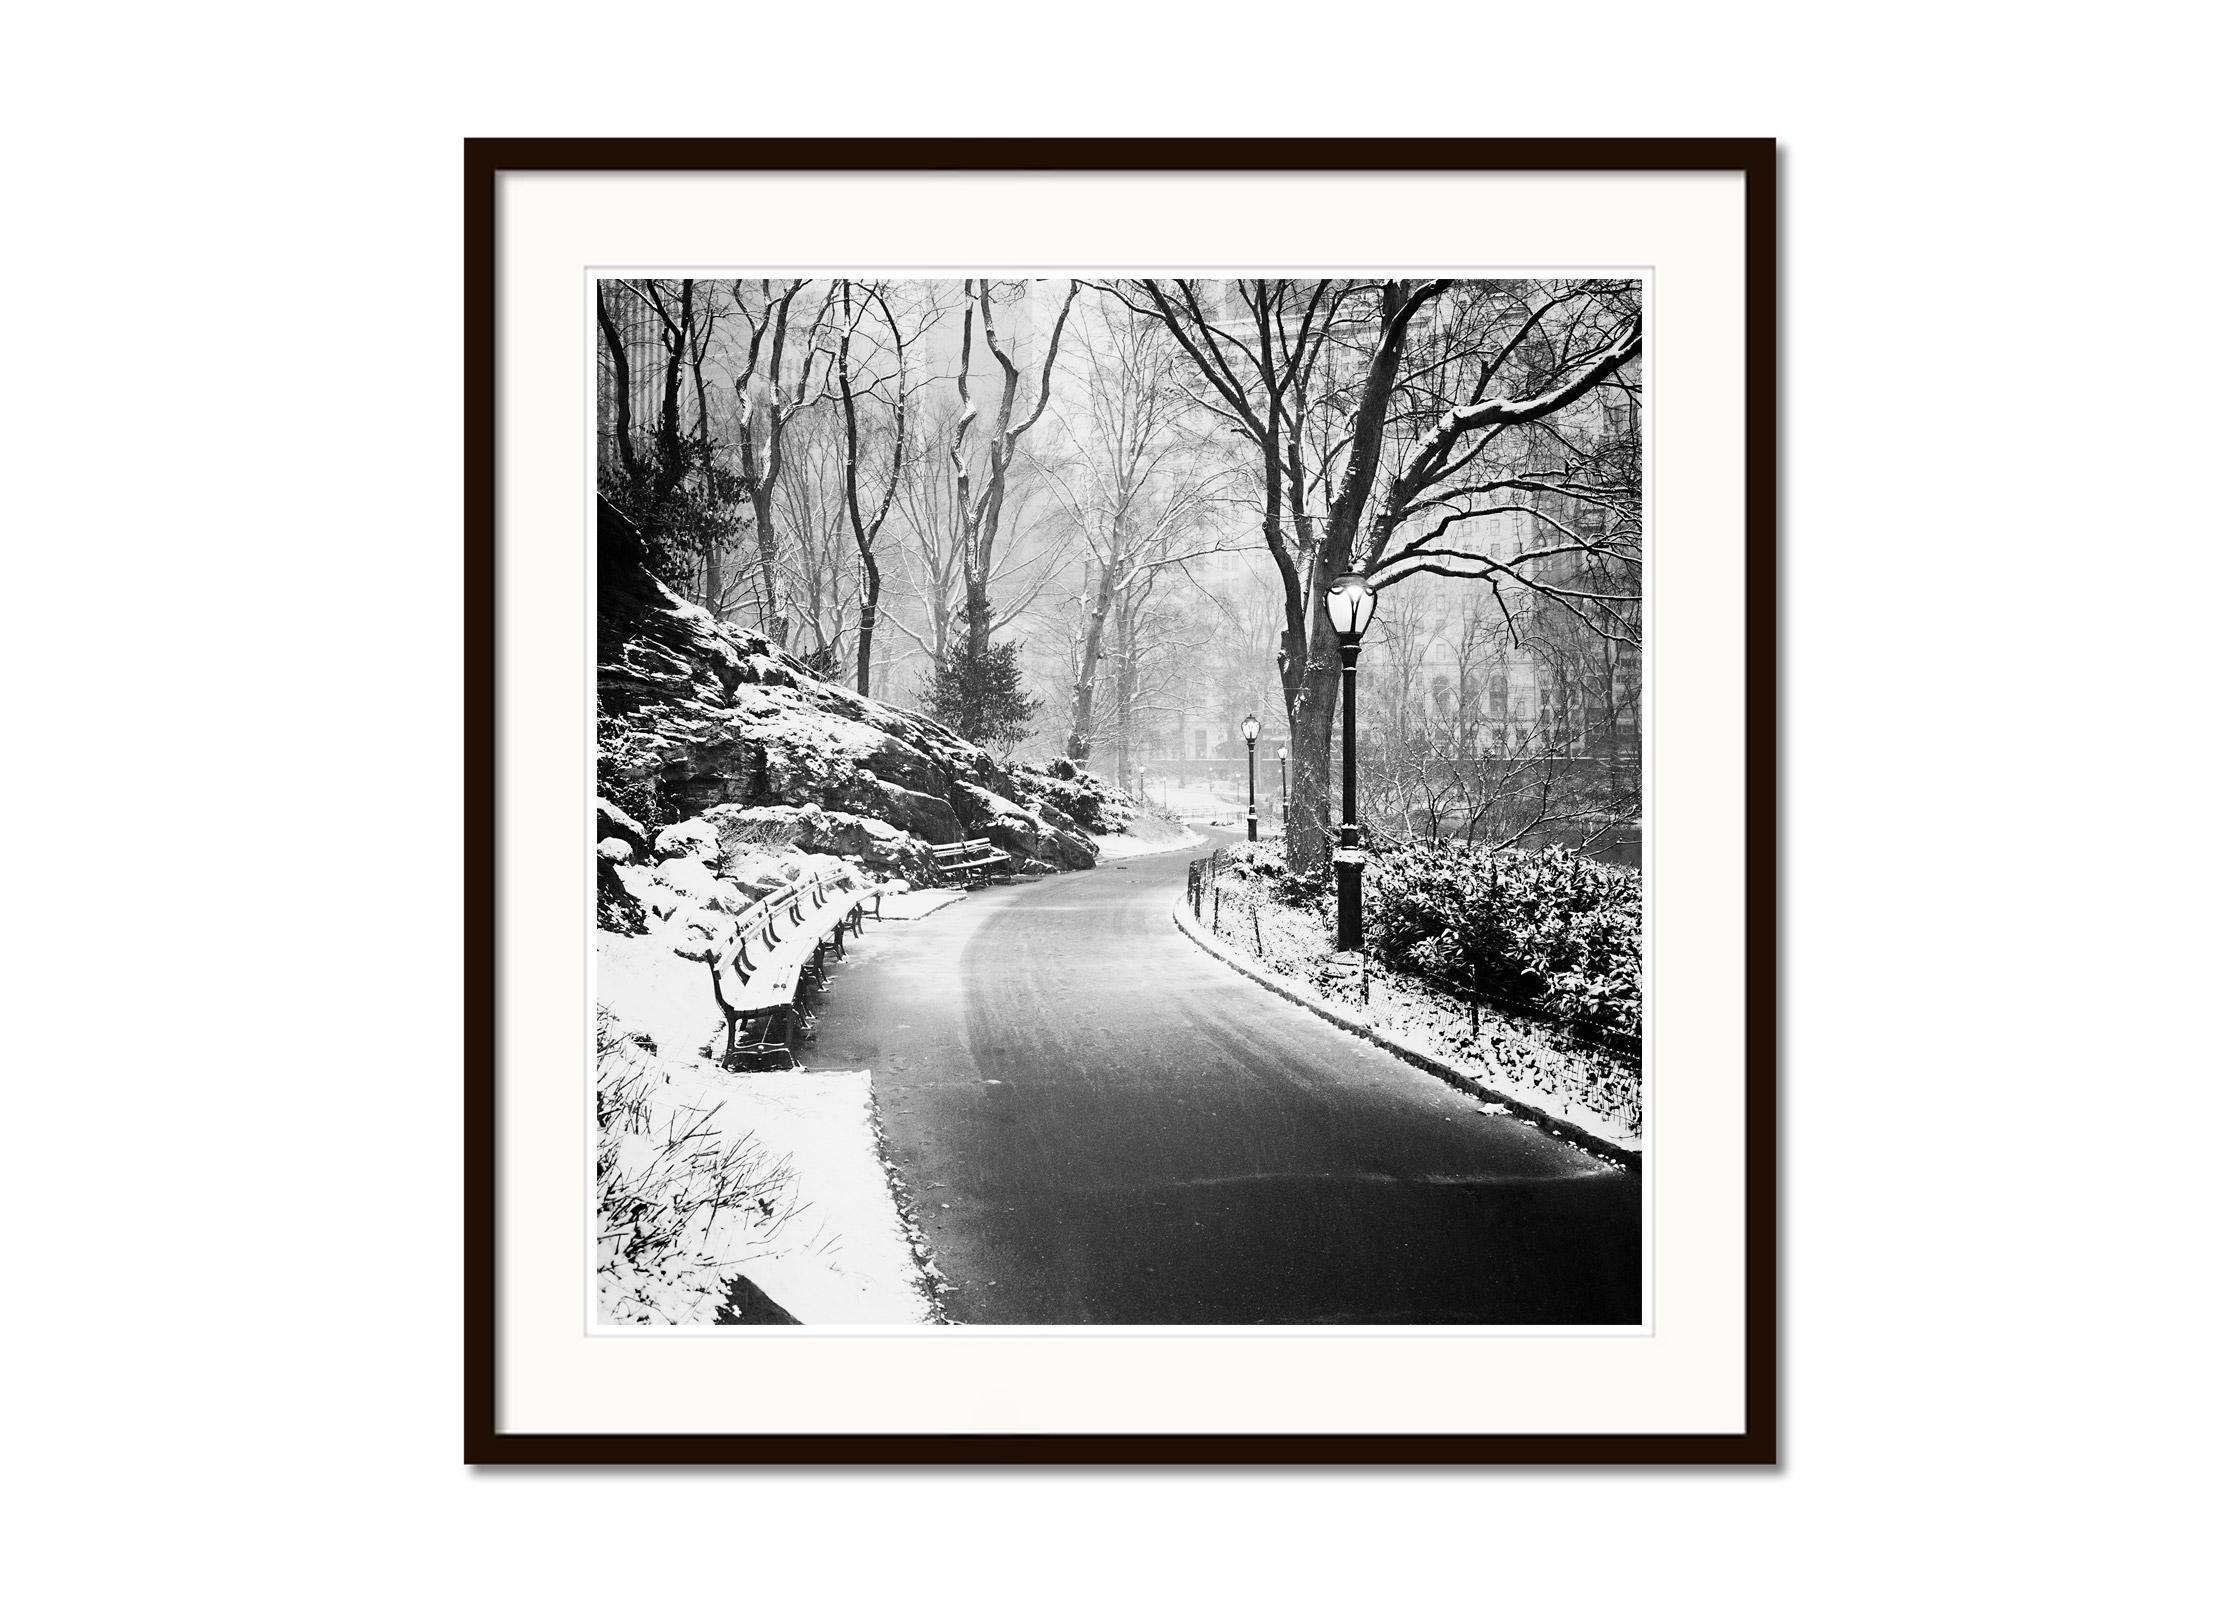 Snow covered Central Park, New York City, black and white cityscape photography - Jugendstil Photograph by Gerald Berghammer